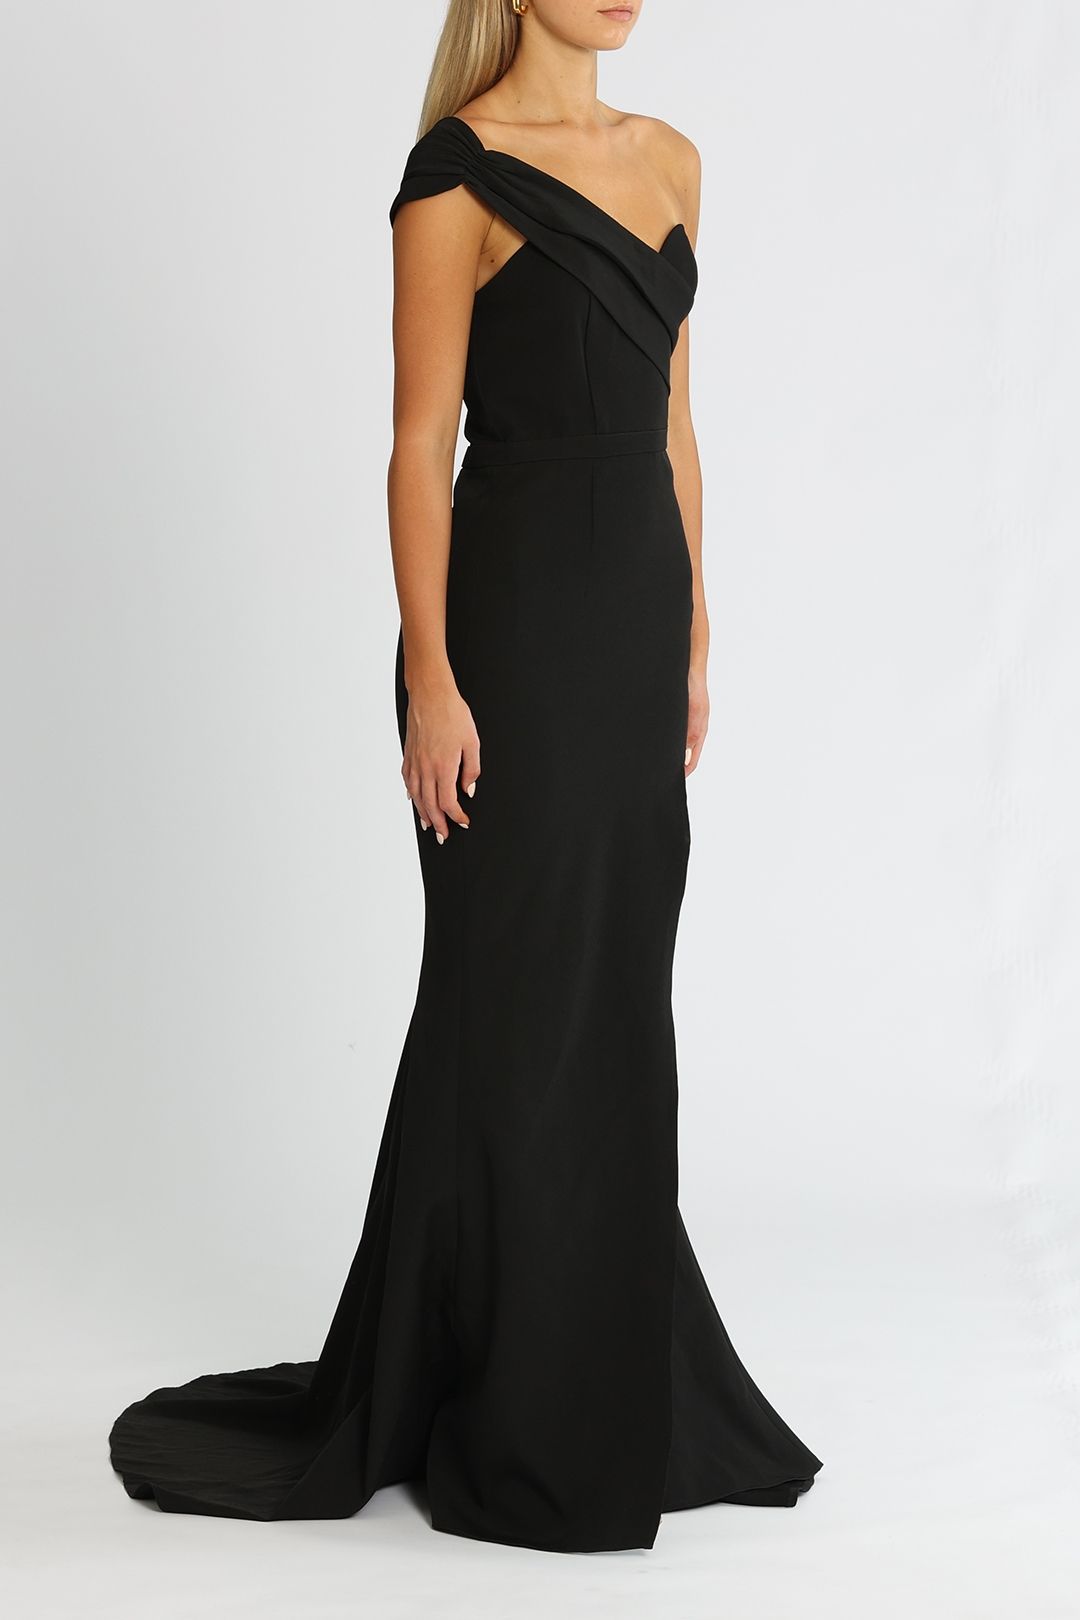 Hire One Sided Off The Shoulder Detail Gown In Black Elle Zeitoune Glamcorner